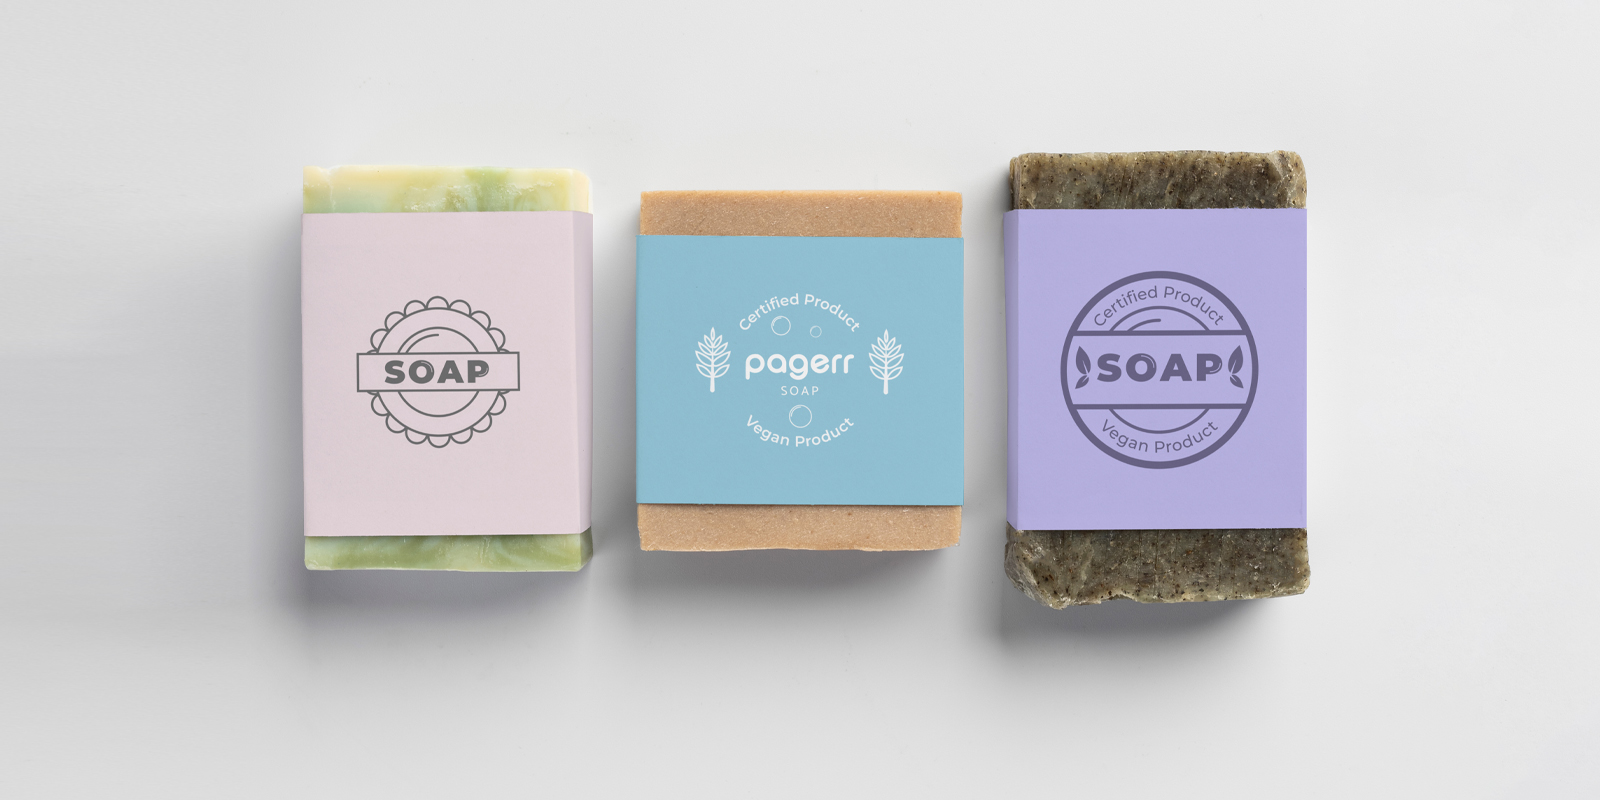 Soap labels in Paris - Print with Pagerr